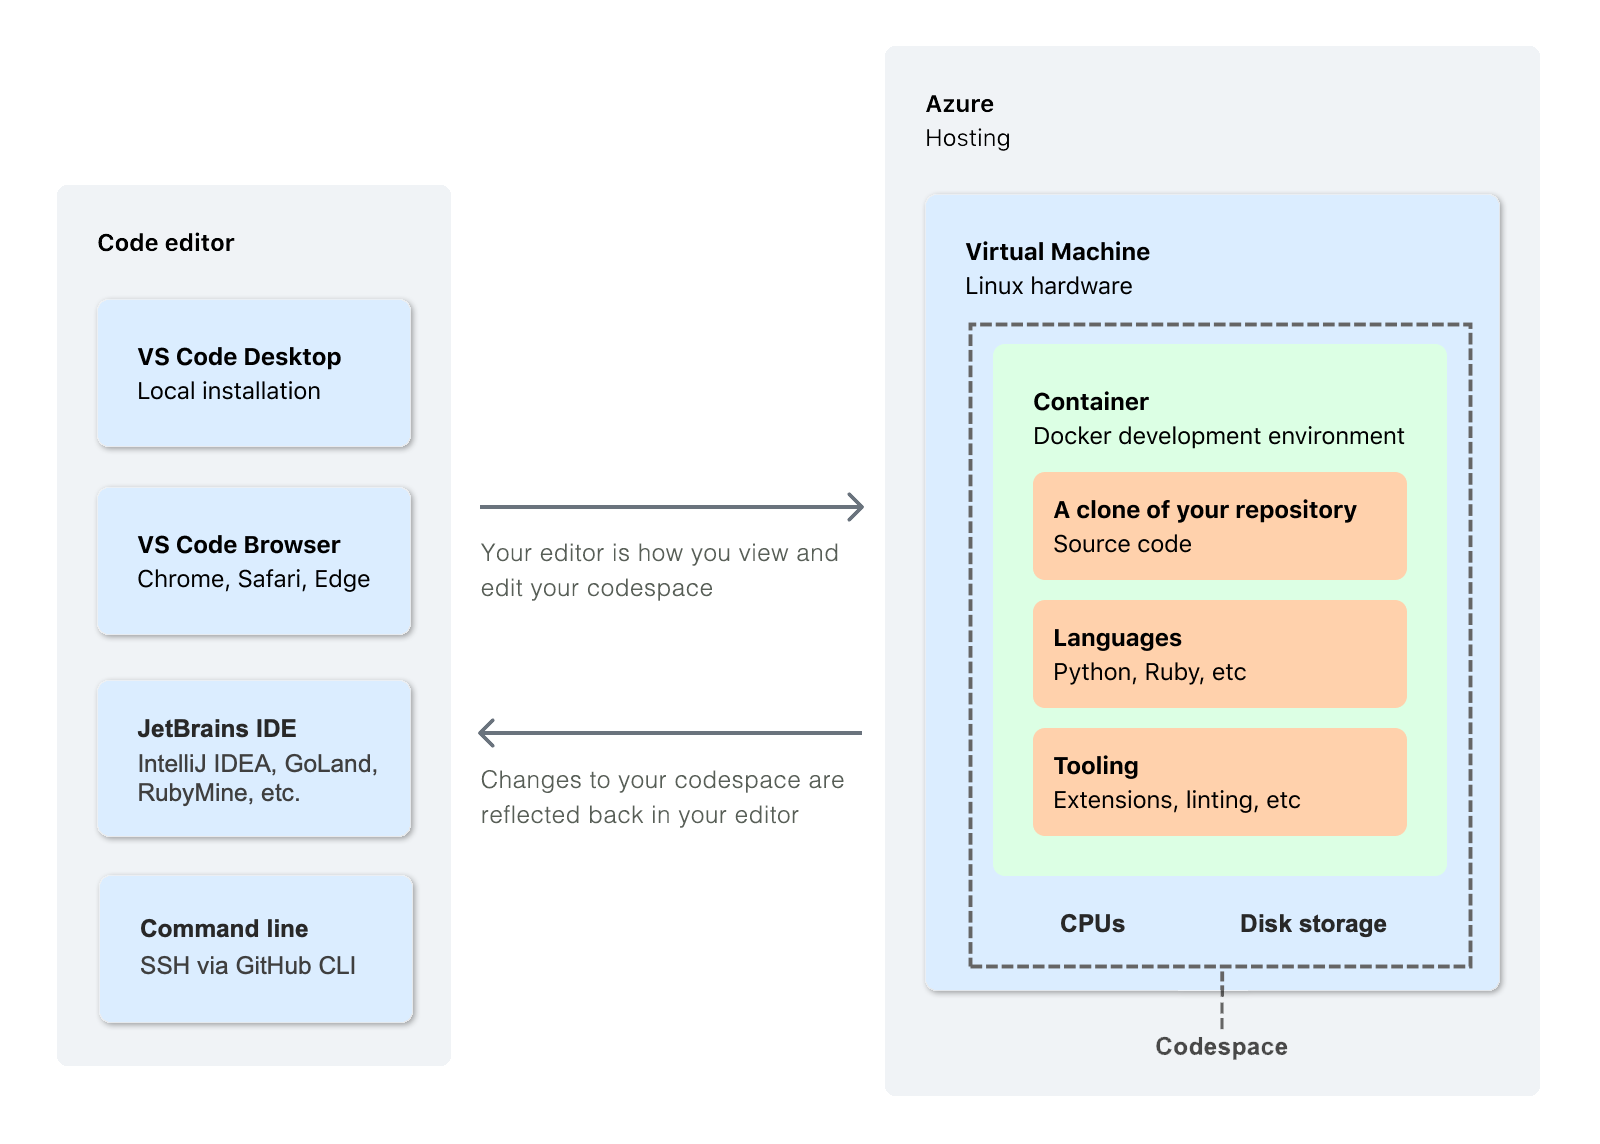 A diagram showing the relationship between a code editor and a codespace running on an Azure virtual machine.